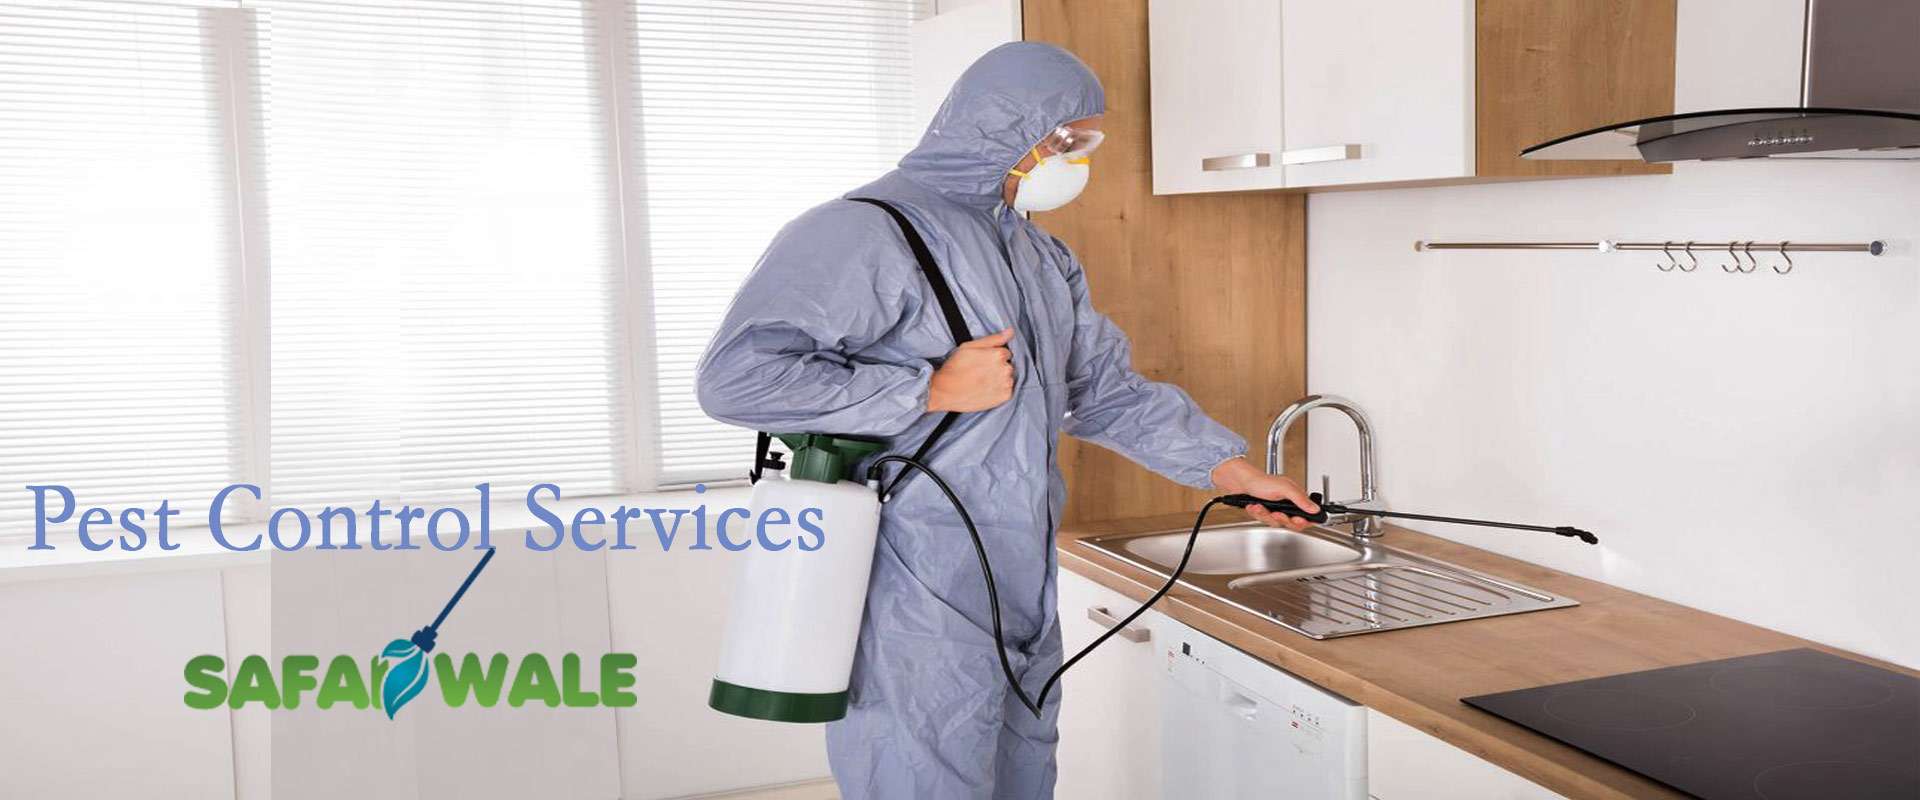 Pest Control Services In Bhiwandi Industrial Area, Thane